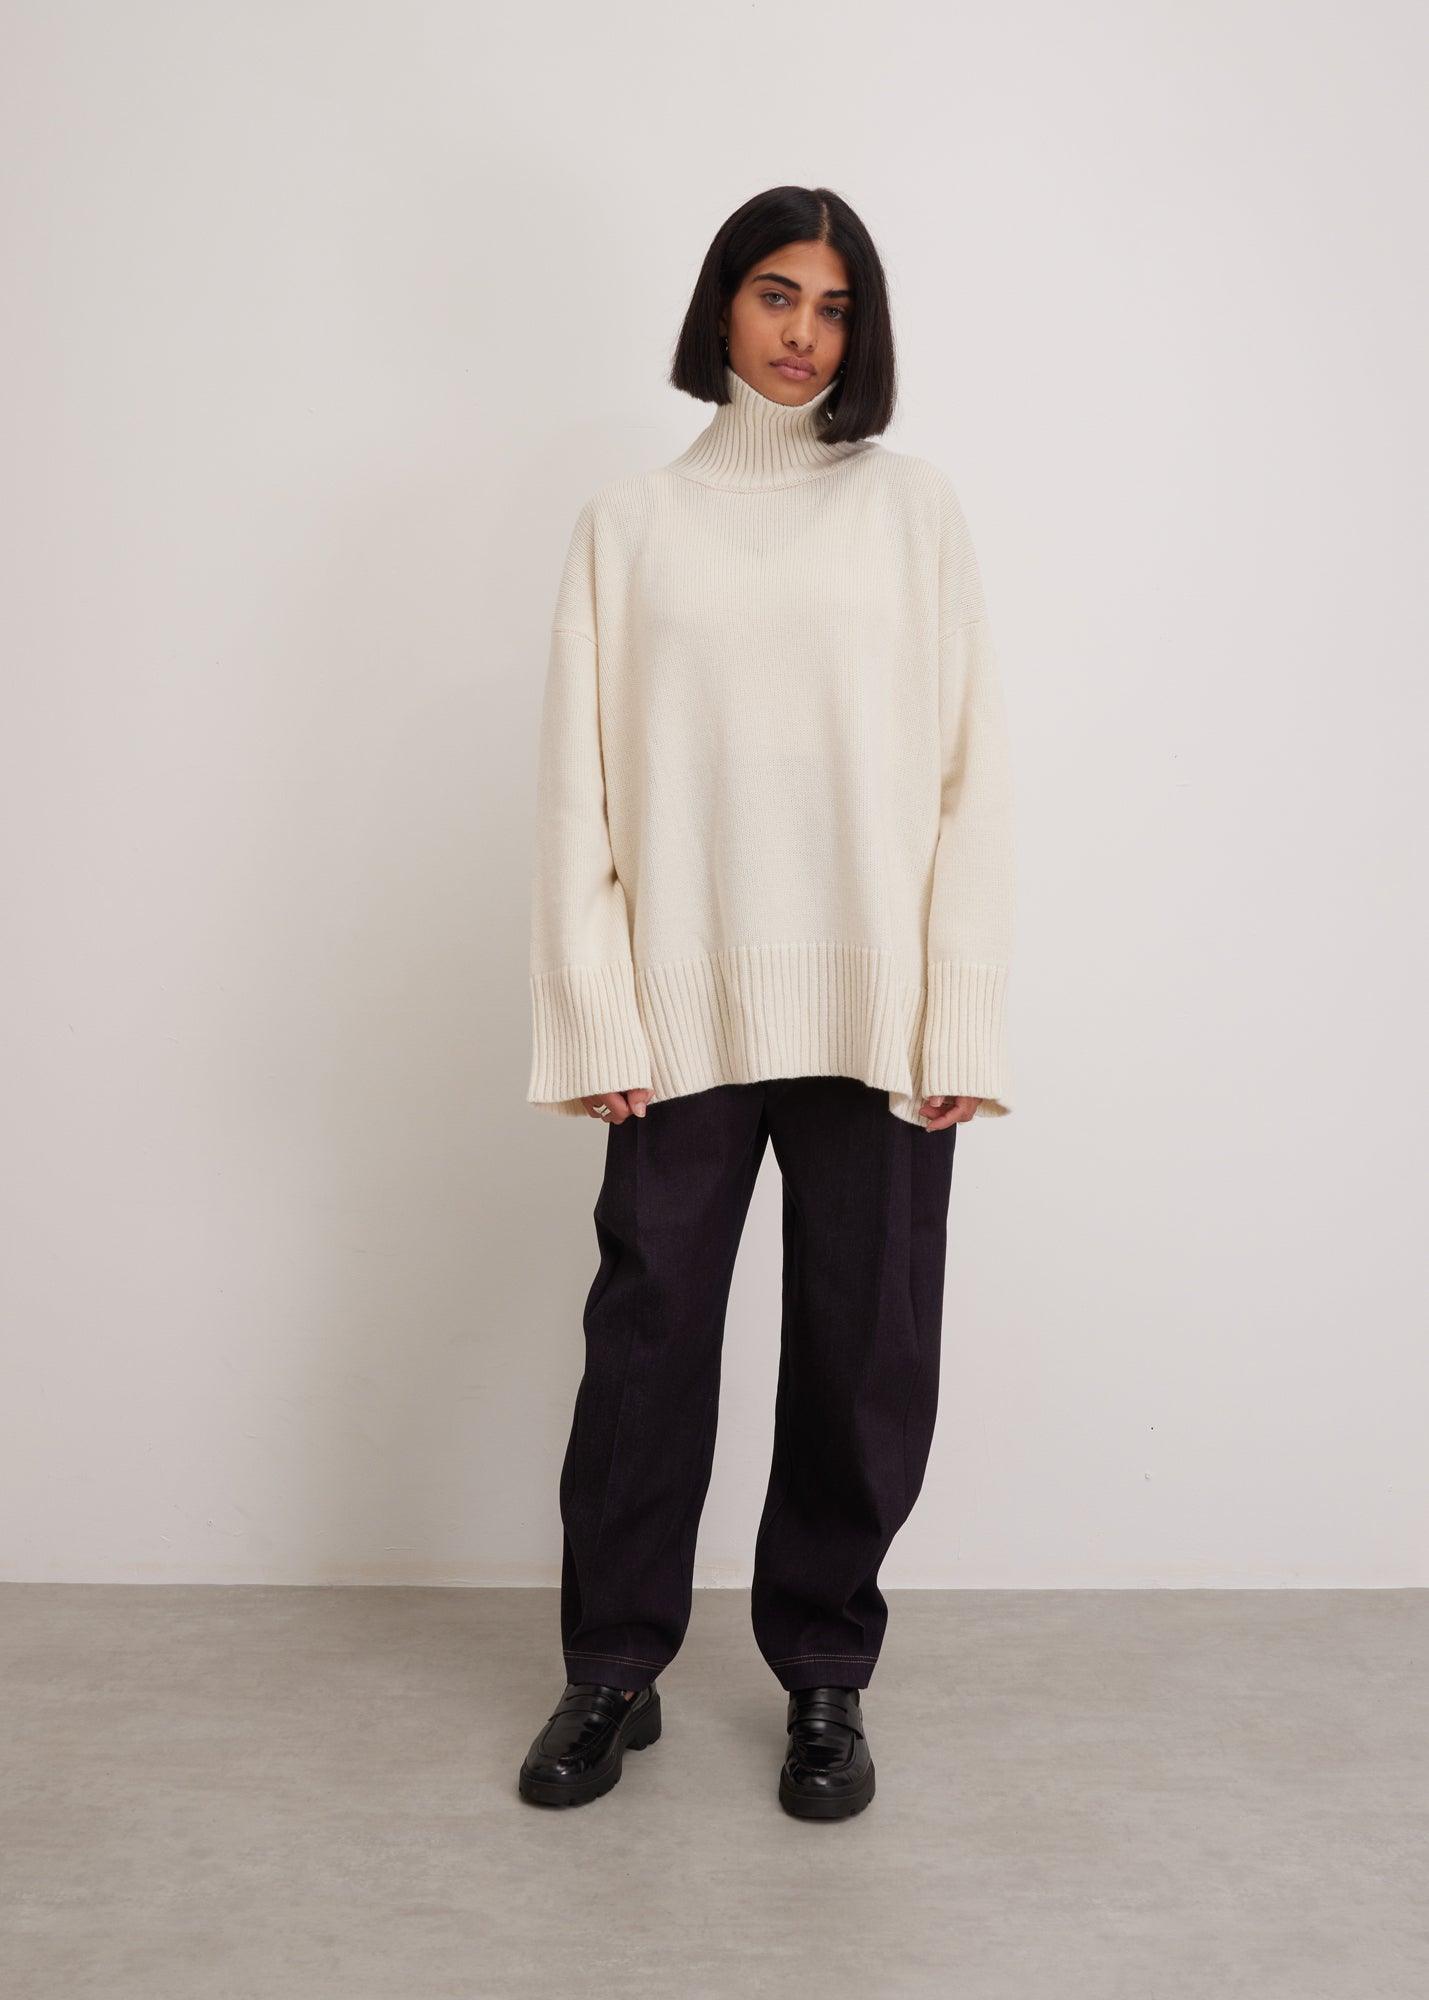 White Sweater | Classic Winter Elegance | Independent Fashion